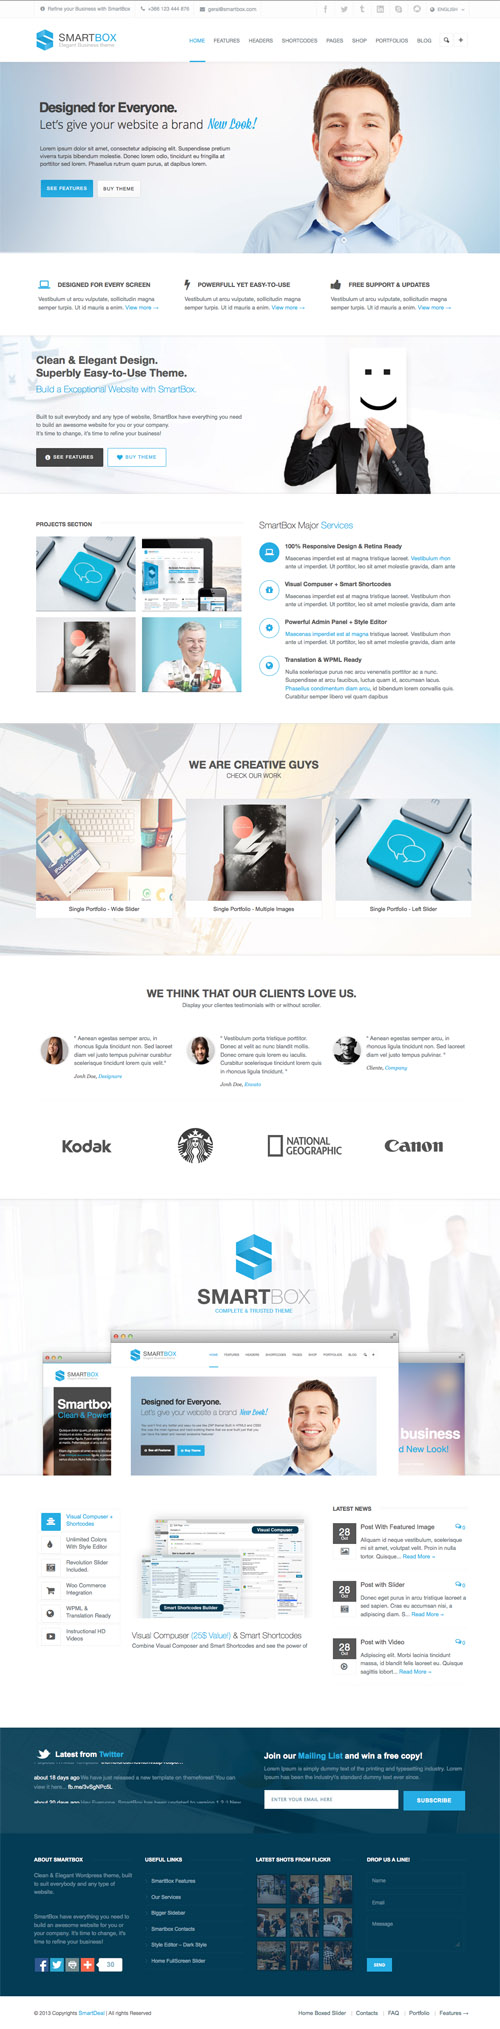 Smartbox designs, themes, templates and downloadable graphic